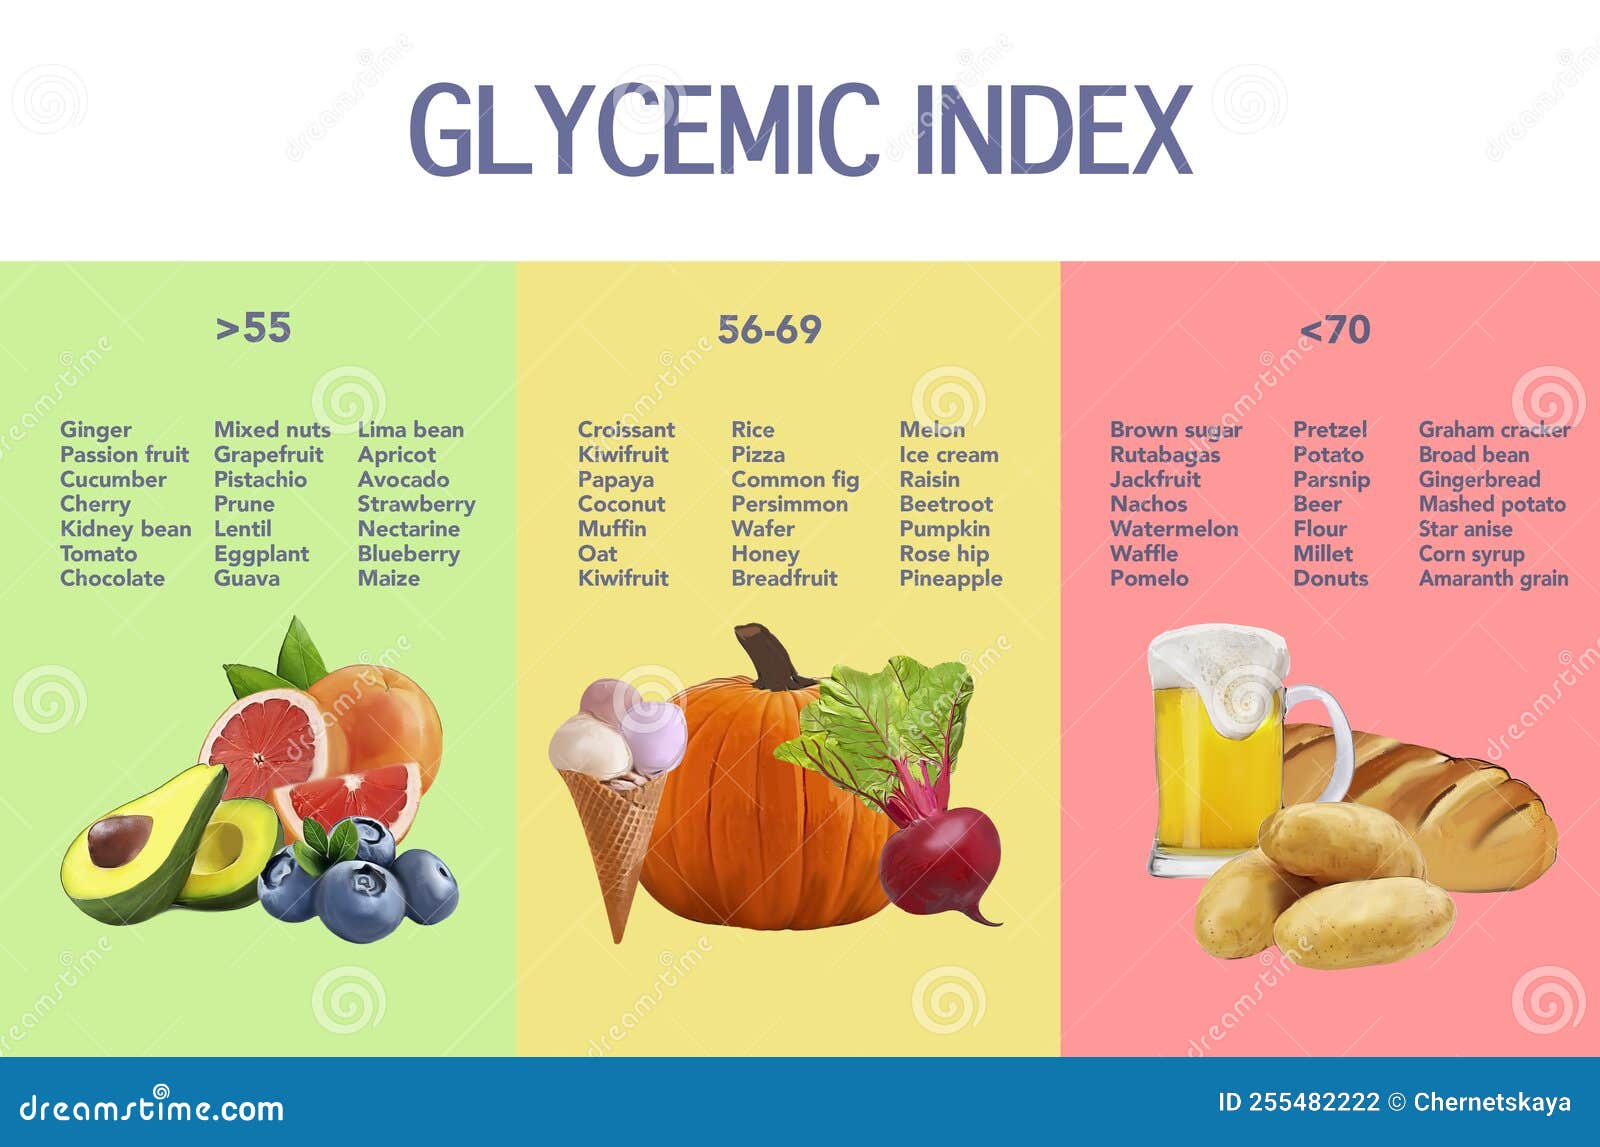 Glycemic Index Of Chart